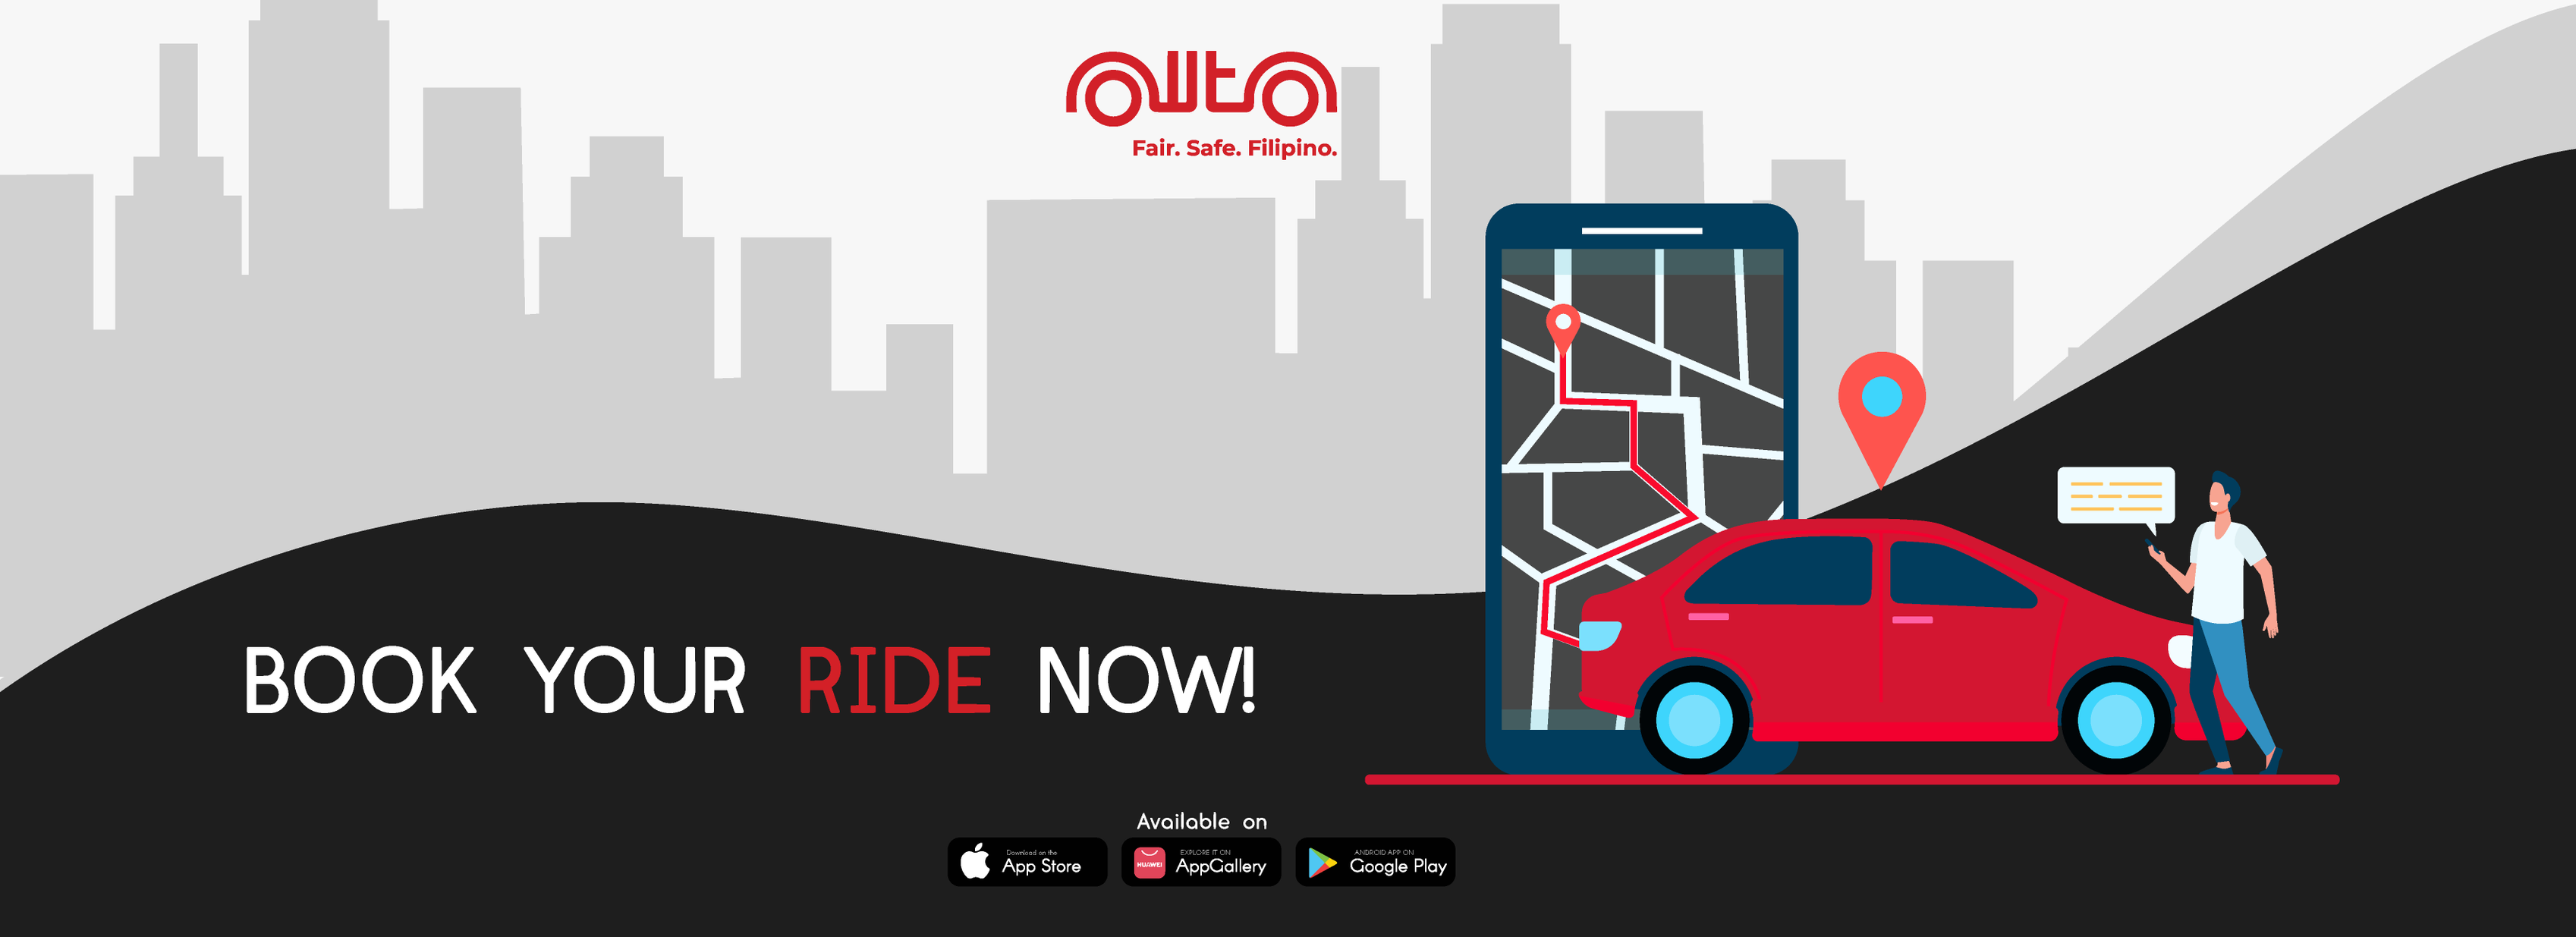 ride-hailing app philippines - owto